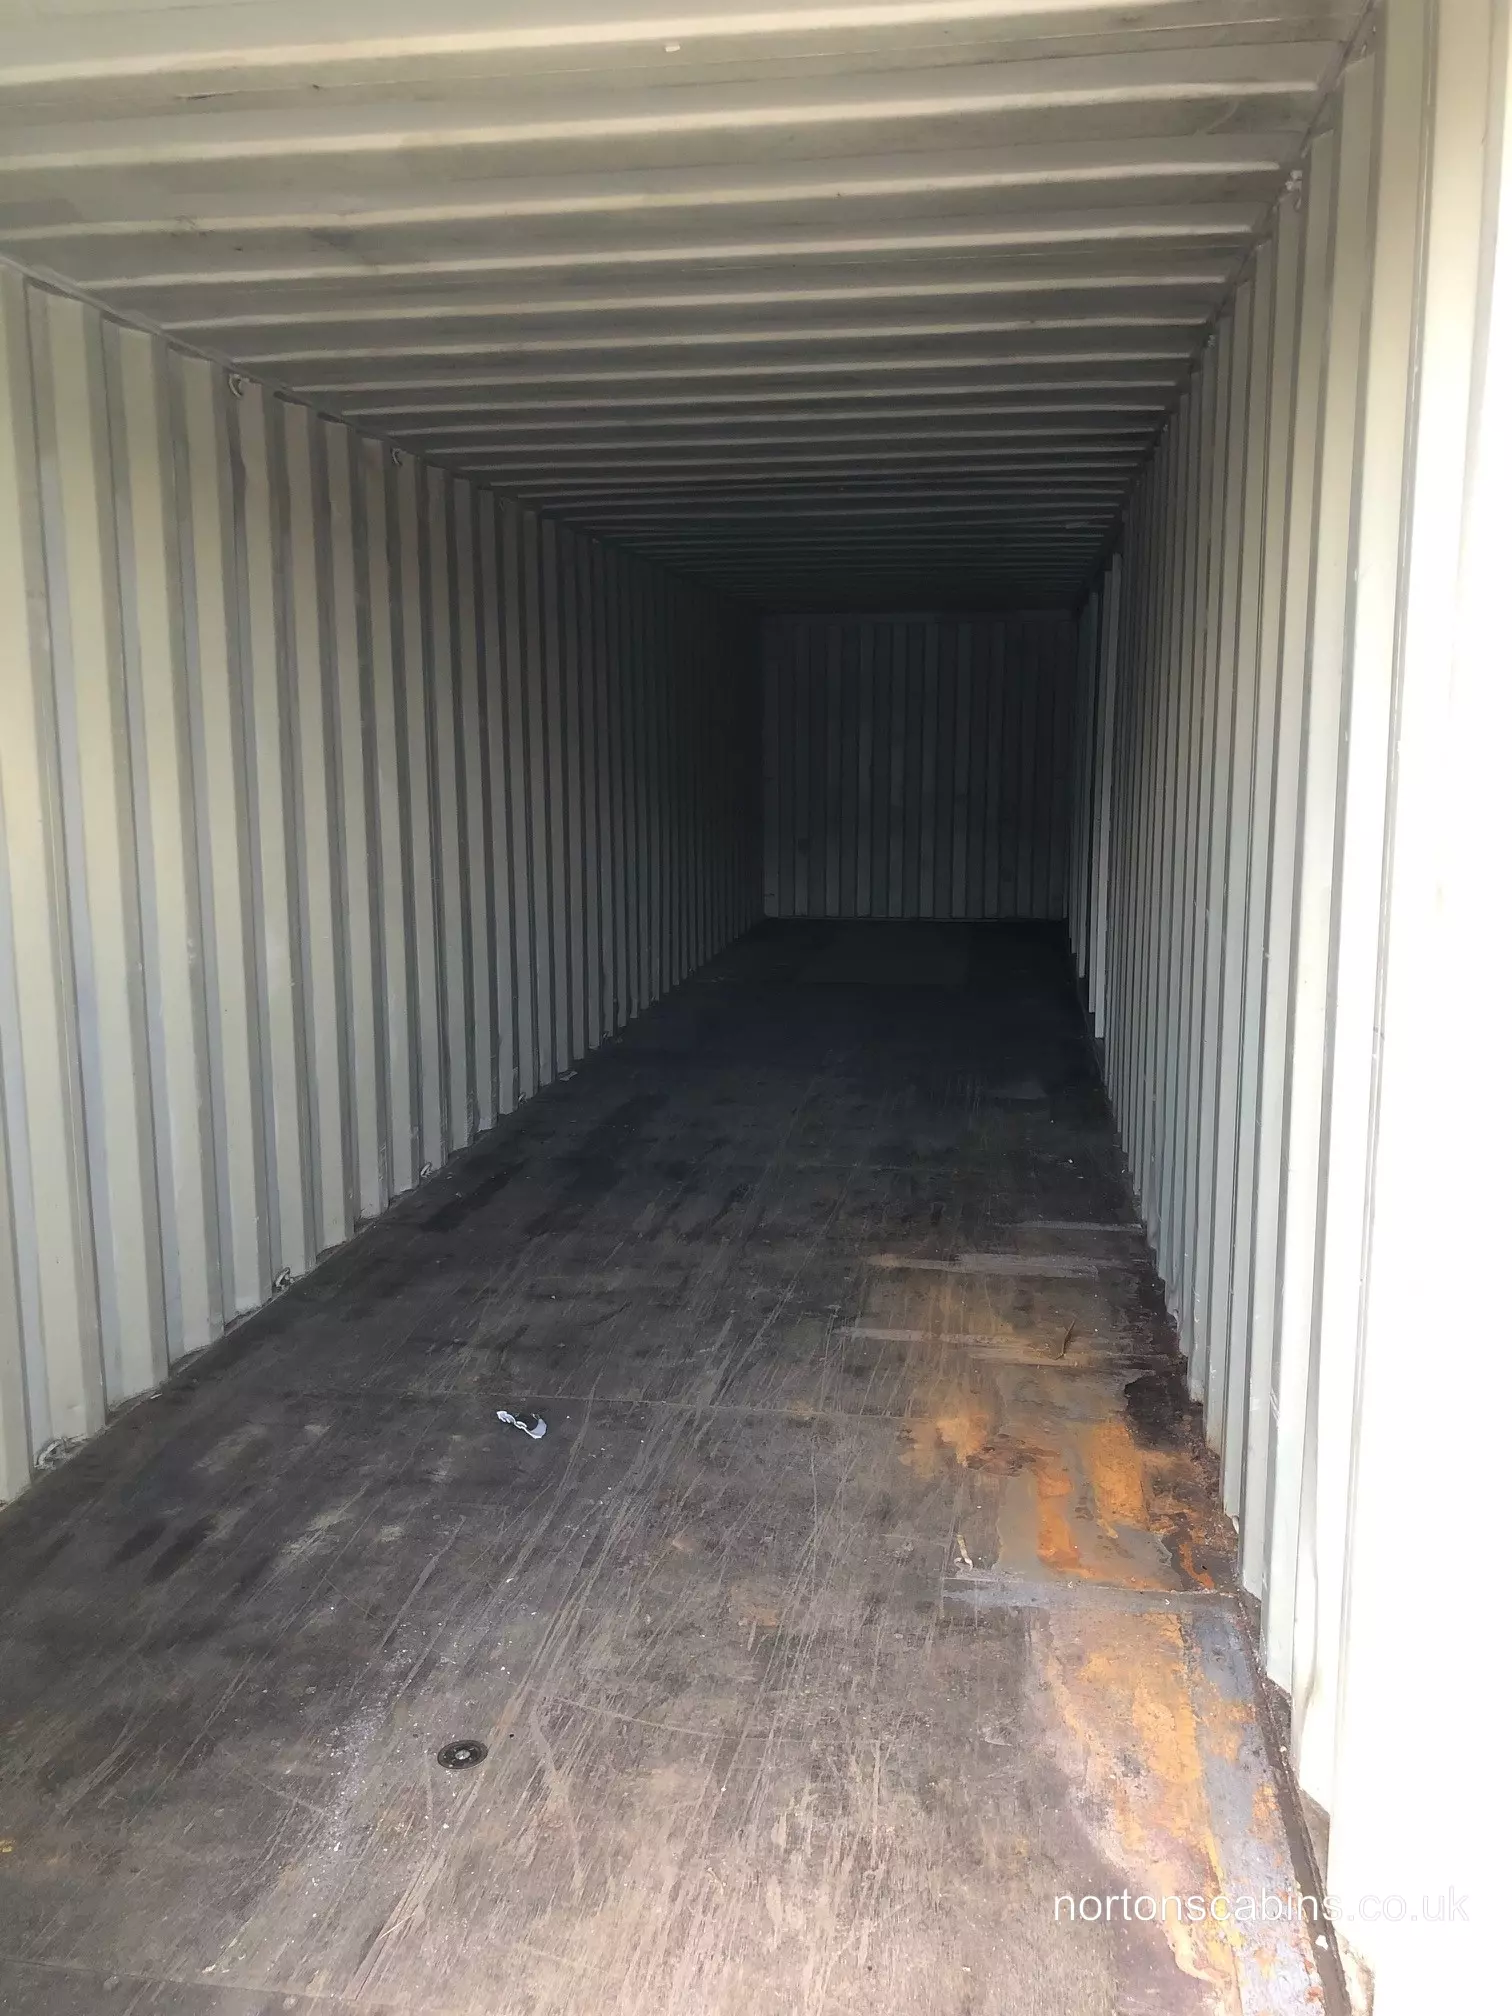 Ref: Nor232 40ftx8ft Shipping container SOLD